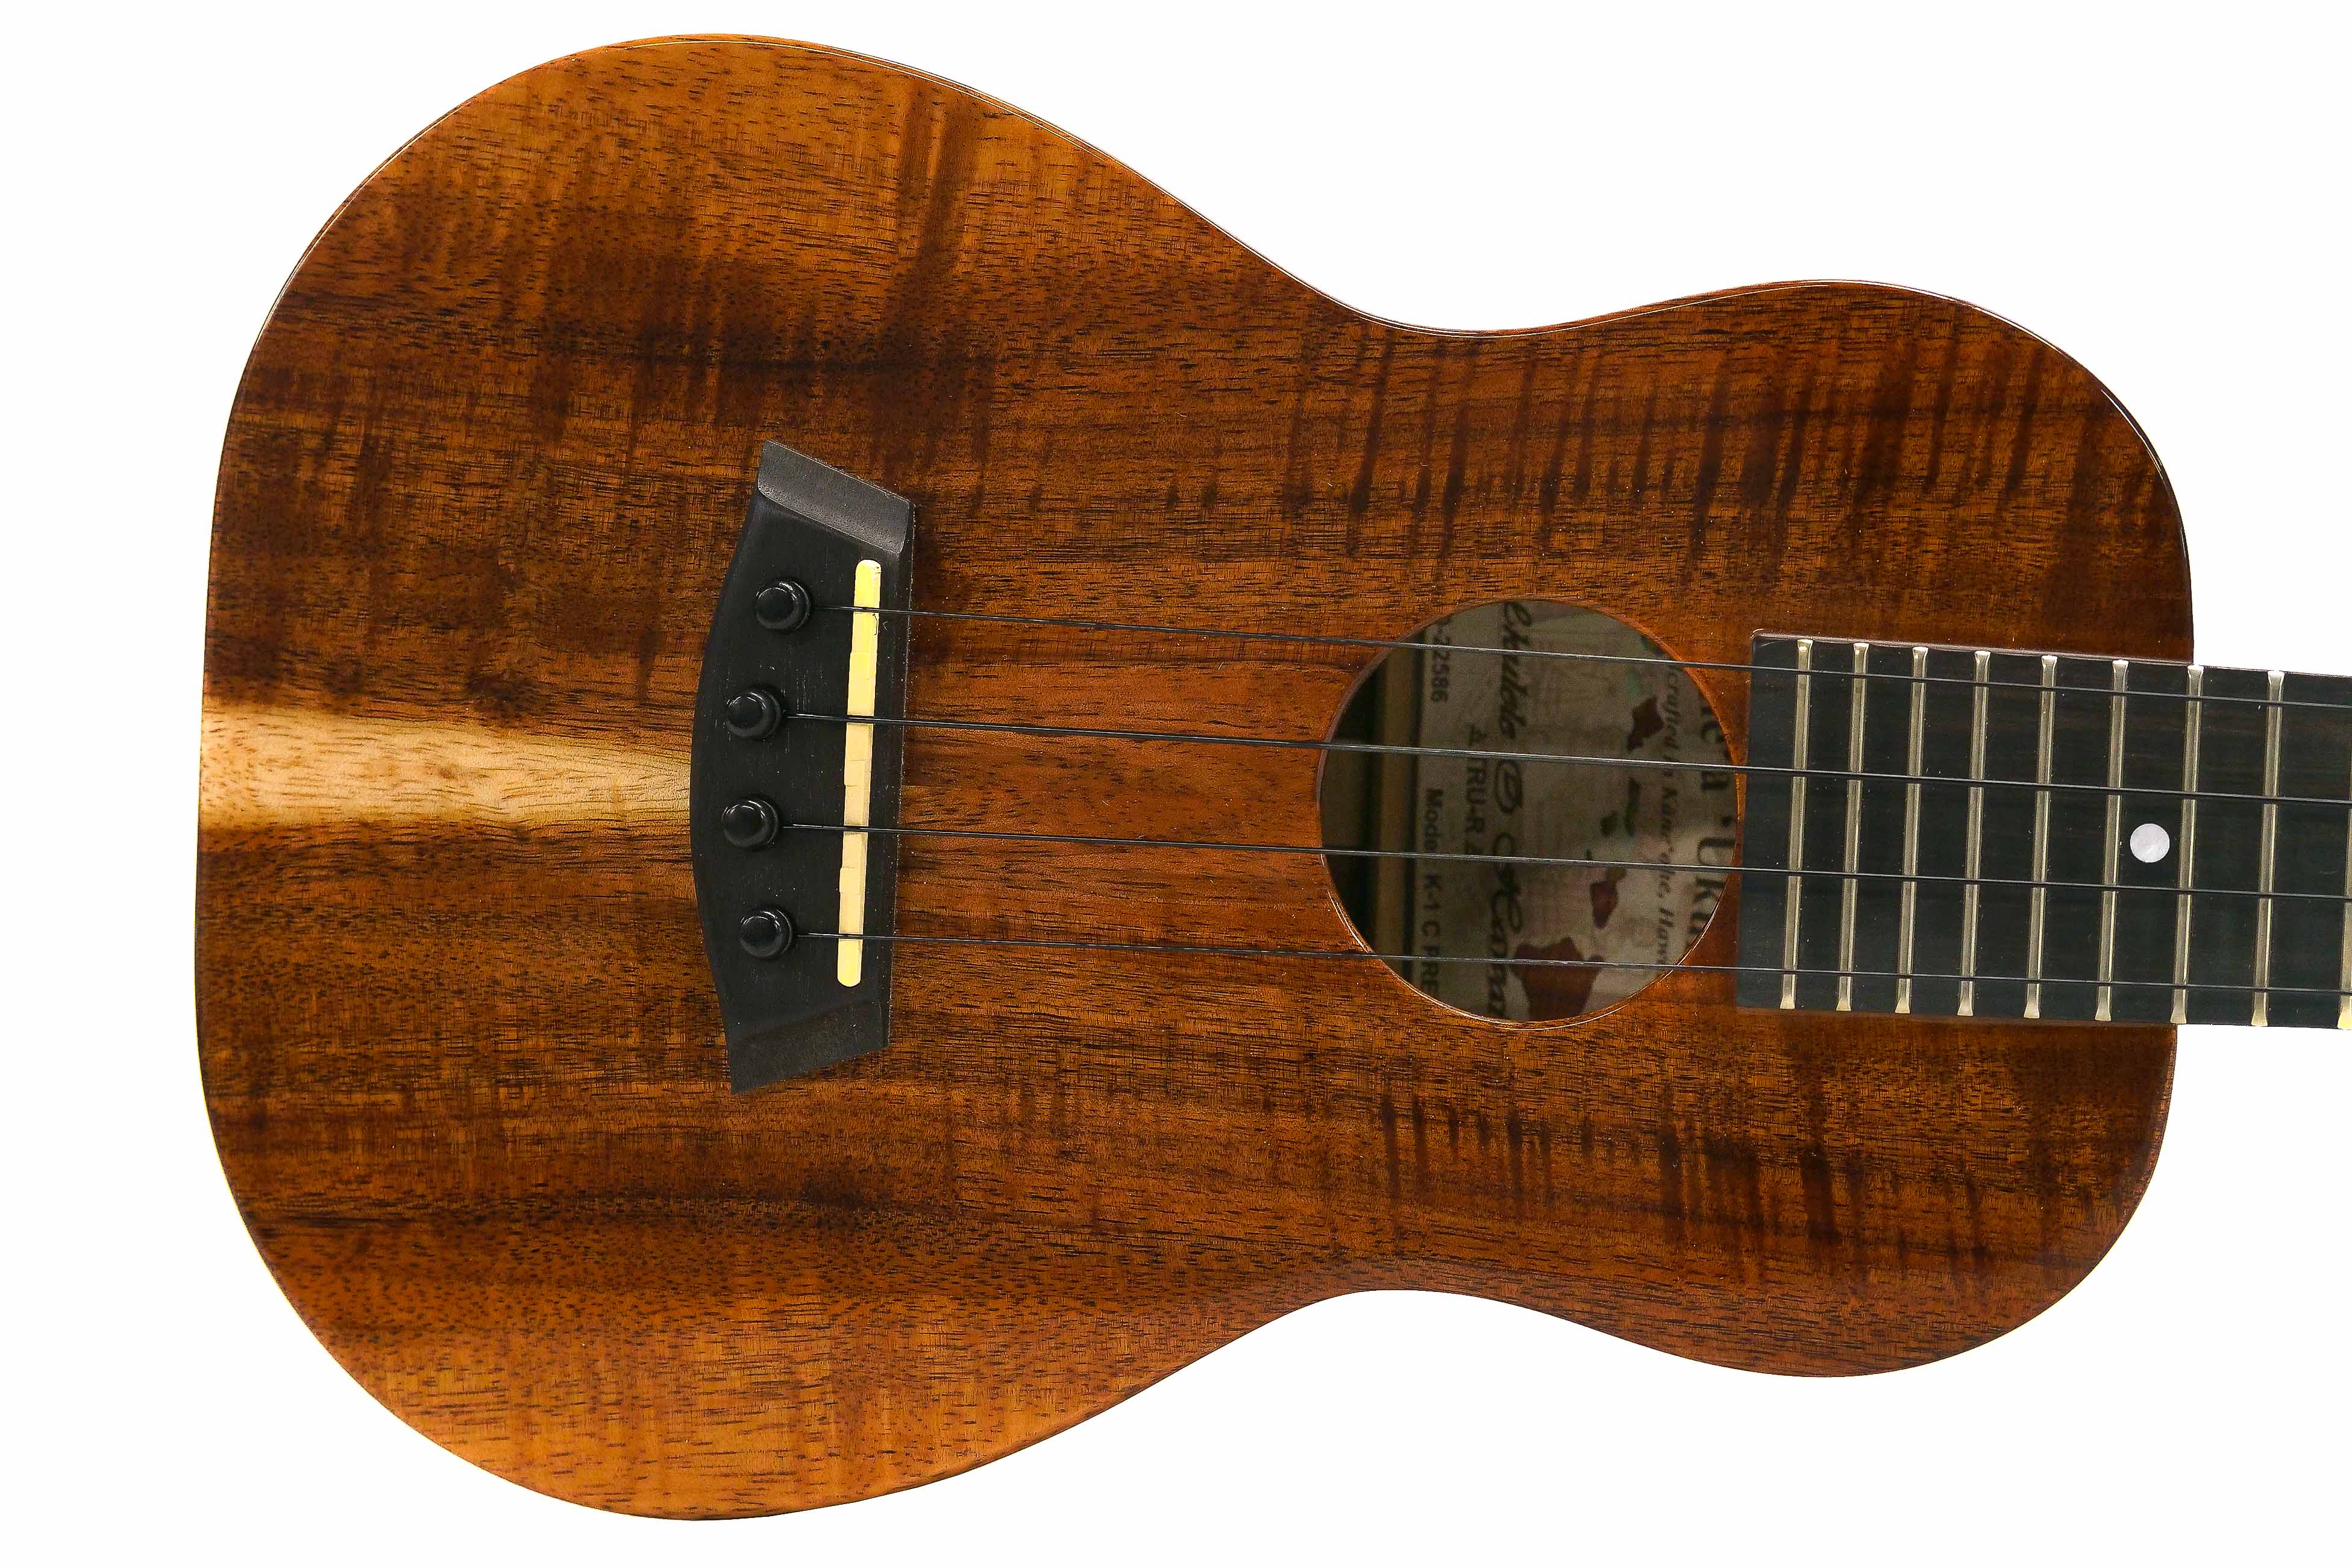 [PRE-OWNED] Kanile'a K-1 C Deluxe Concert Ukulele Solid Koa "Lindi" Made In Hawaii